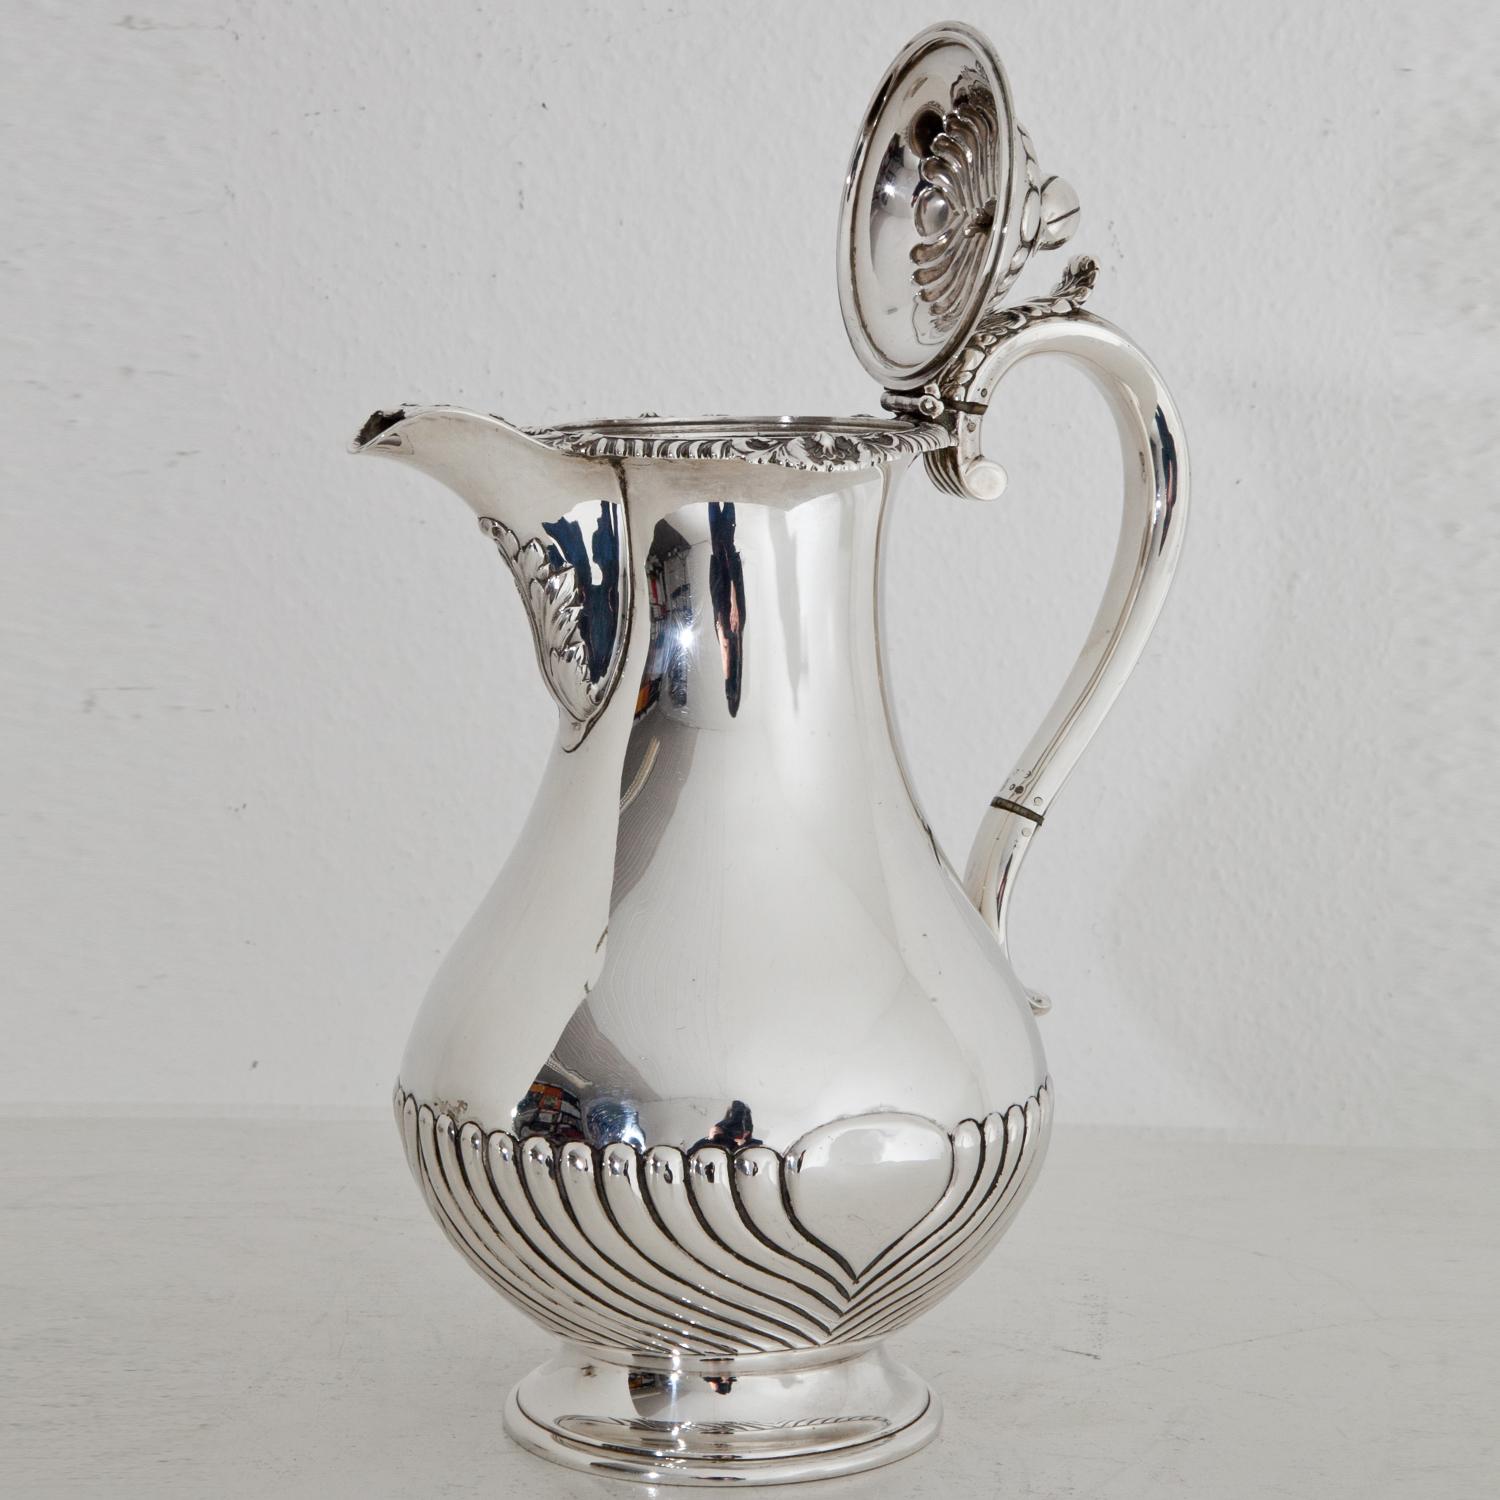 Silver chocolate pot (774g) with a gadrooned belly and ear-shaped handle. The lid and the nozzle are decorated with leaves, the node is in the shape of a cocoa pod. At the bottom, lid and handle are the hallmark of E.J. & W. Barnard.